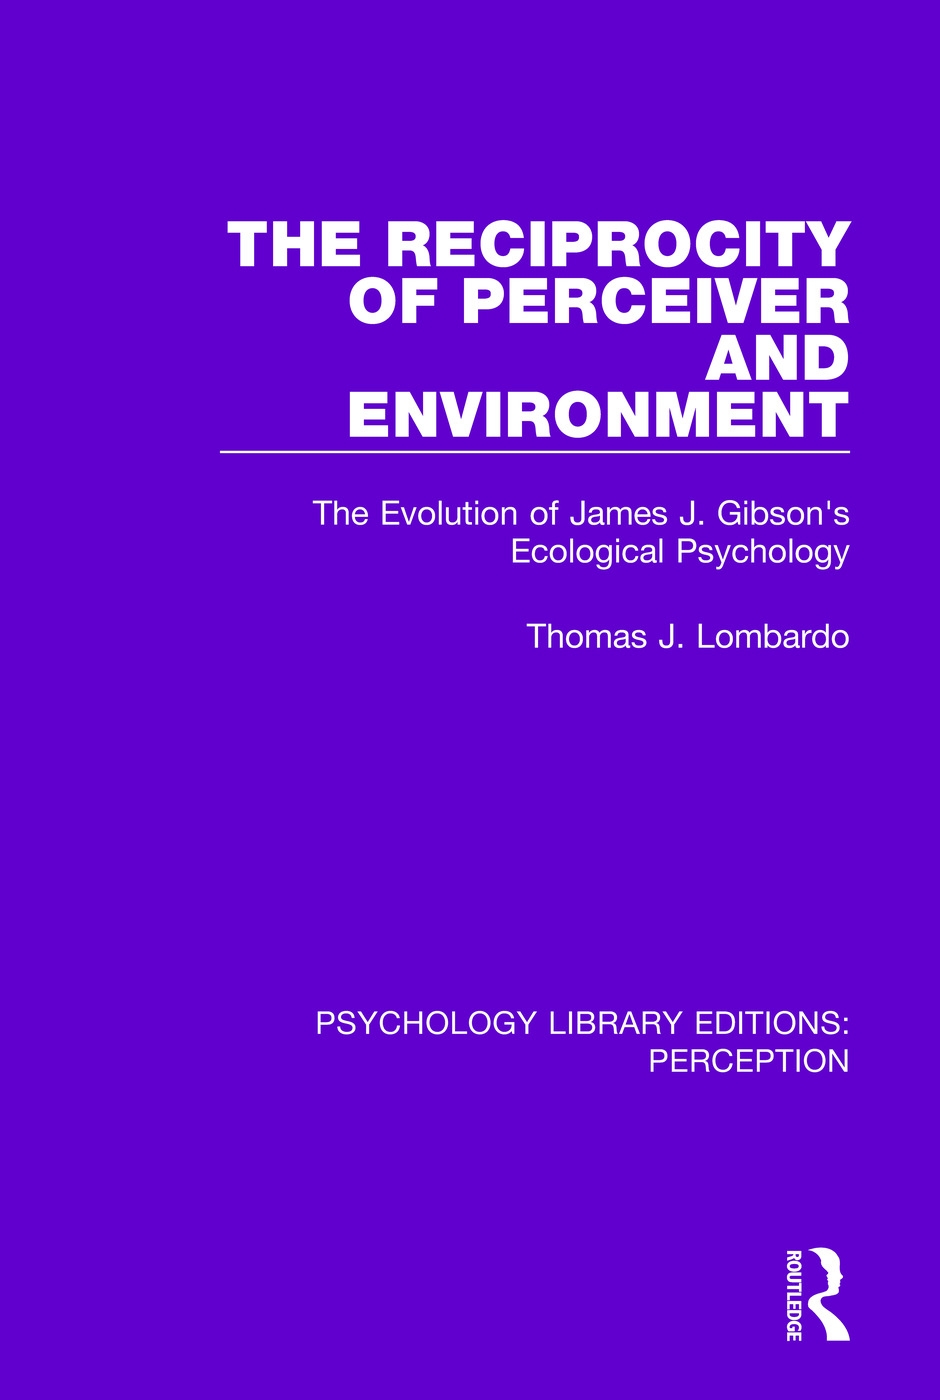 The Reciprocity of Perceiver and Environment: The Evolution of James J. Gibson’s Ecological Psychology